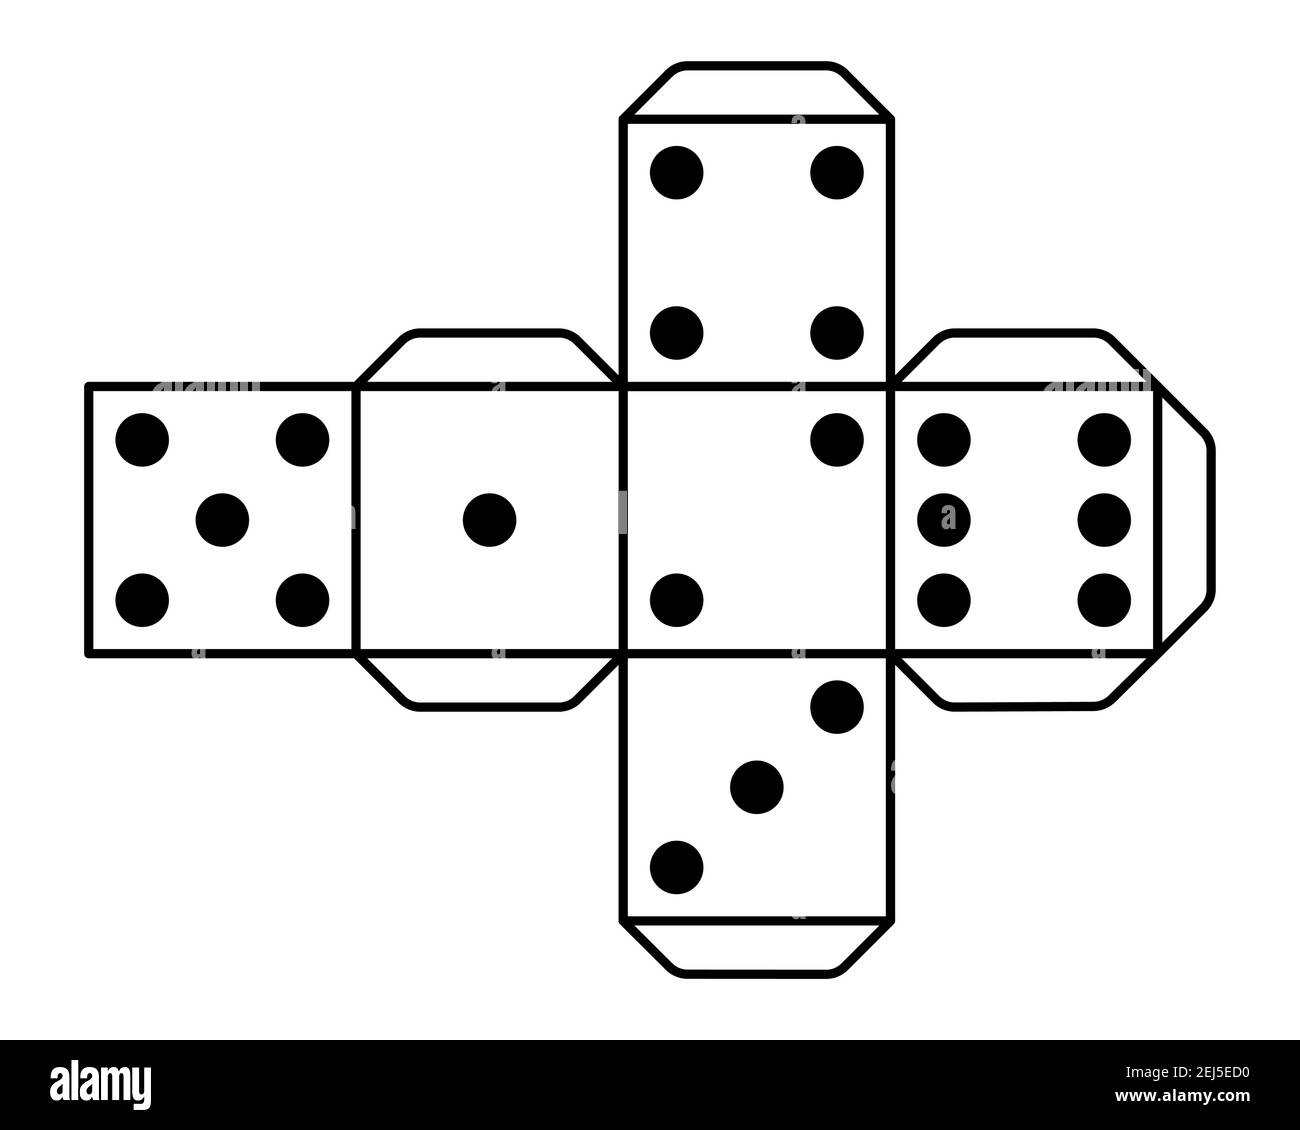 Illustration of the game dice template model Stock Vector